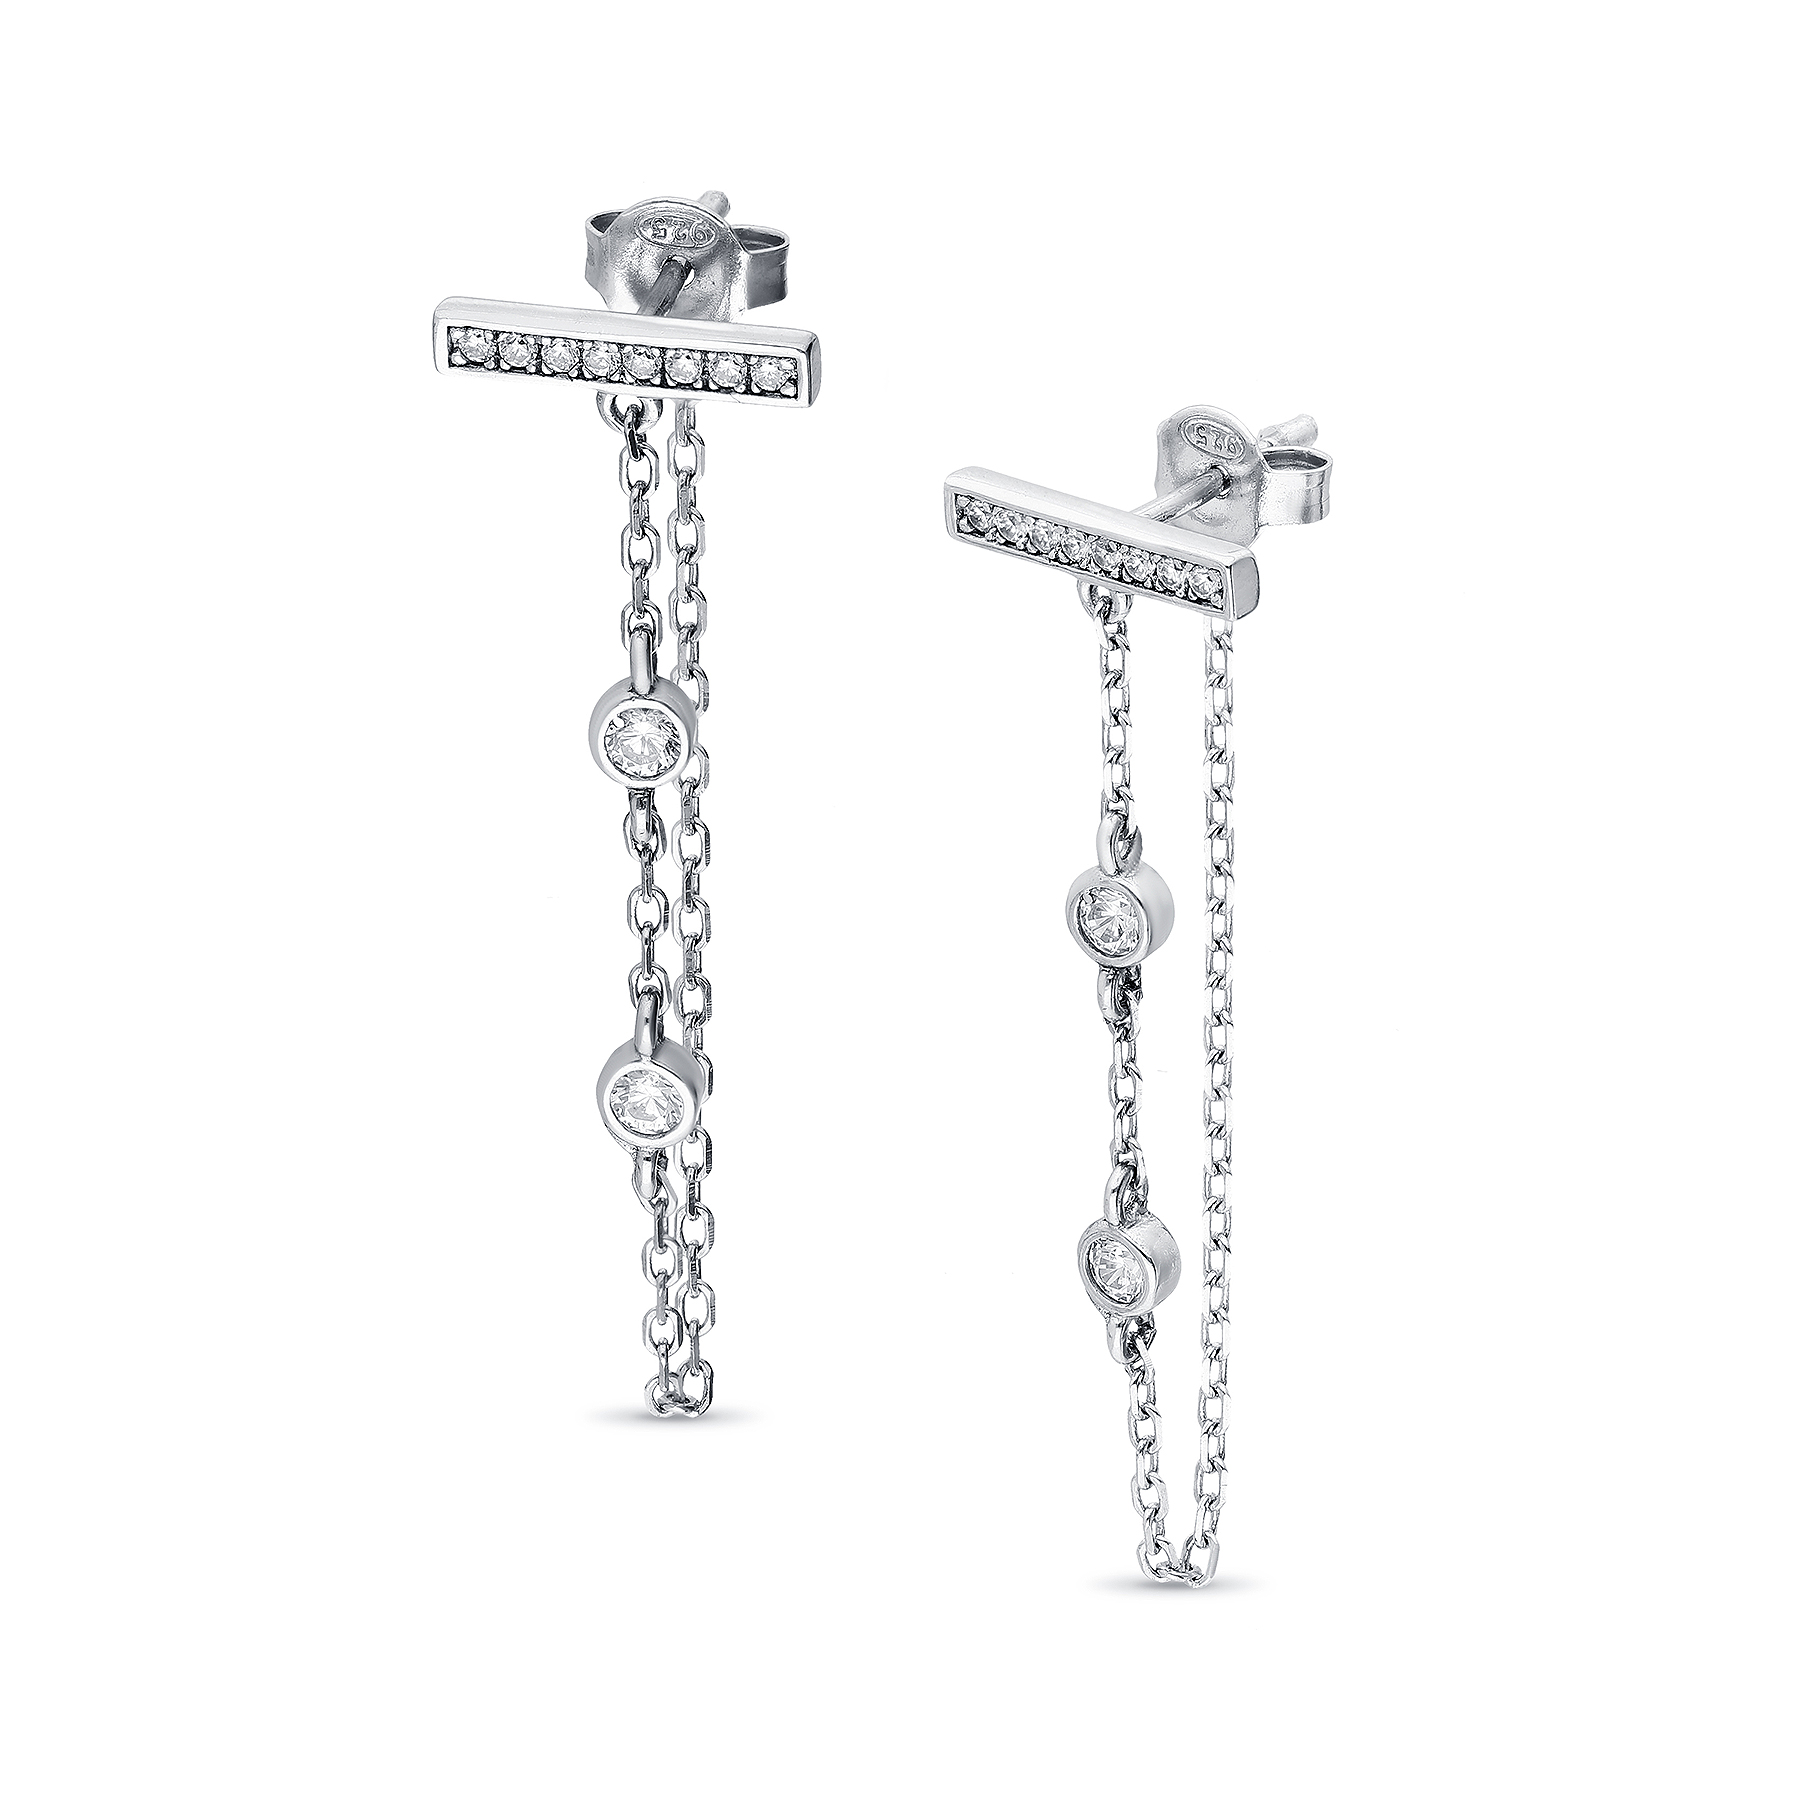 701-21491K - Wholesale 925 Sterling Silver Push-Back Earrings Decorated With CZ